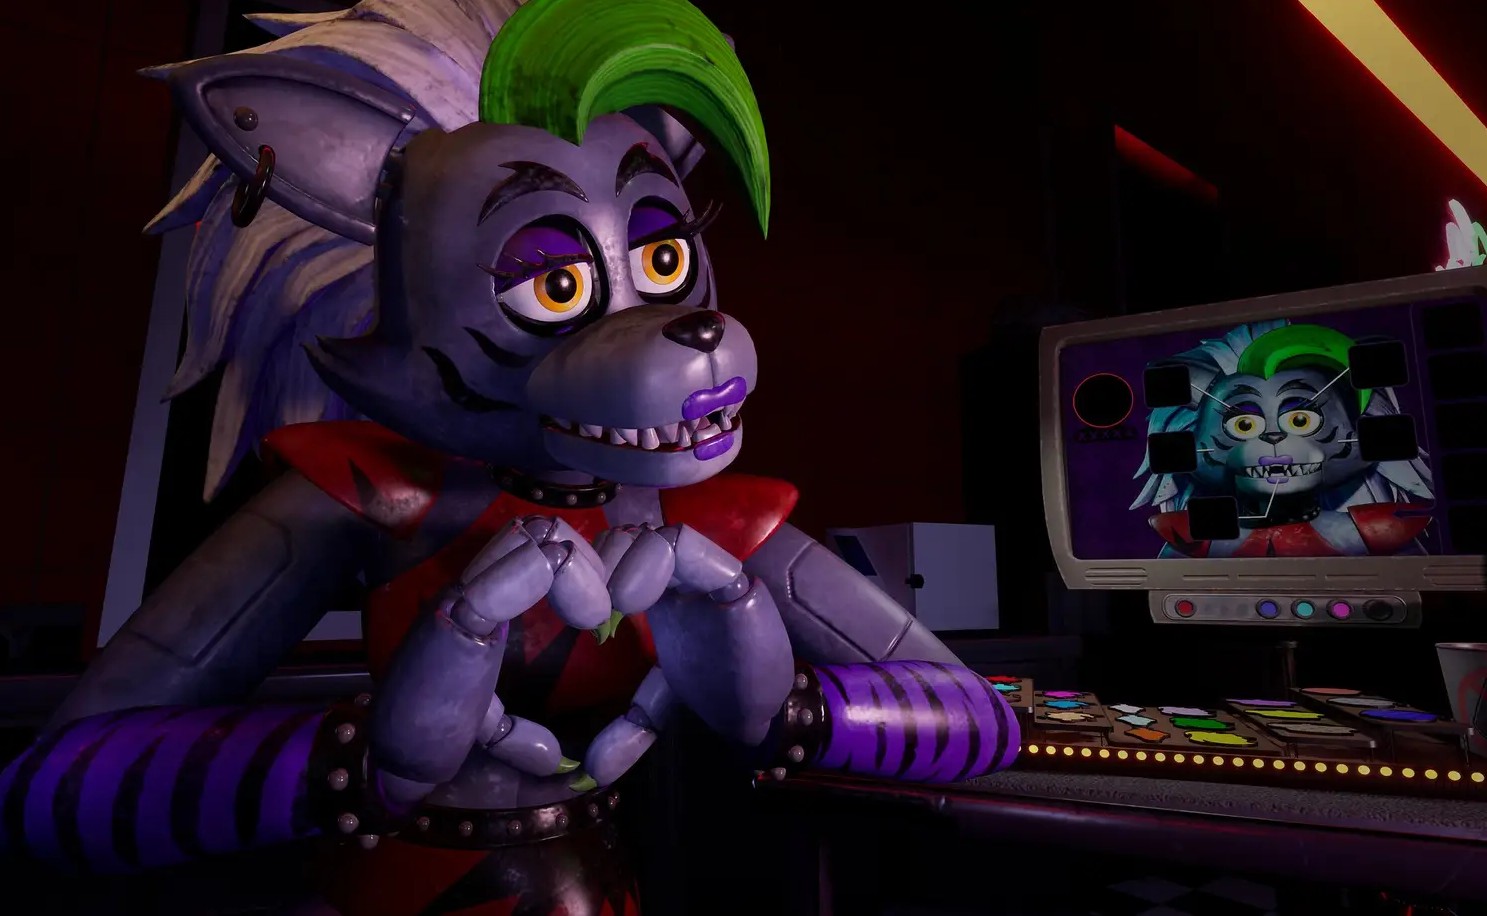 Update] Nightmare-inducing Five Nights at Freddy's 3 arrives on